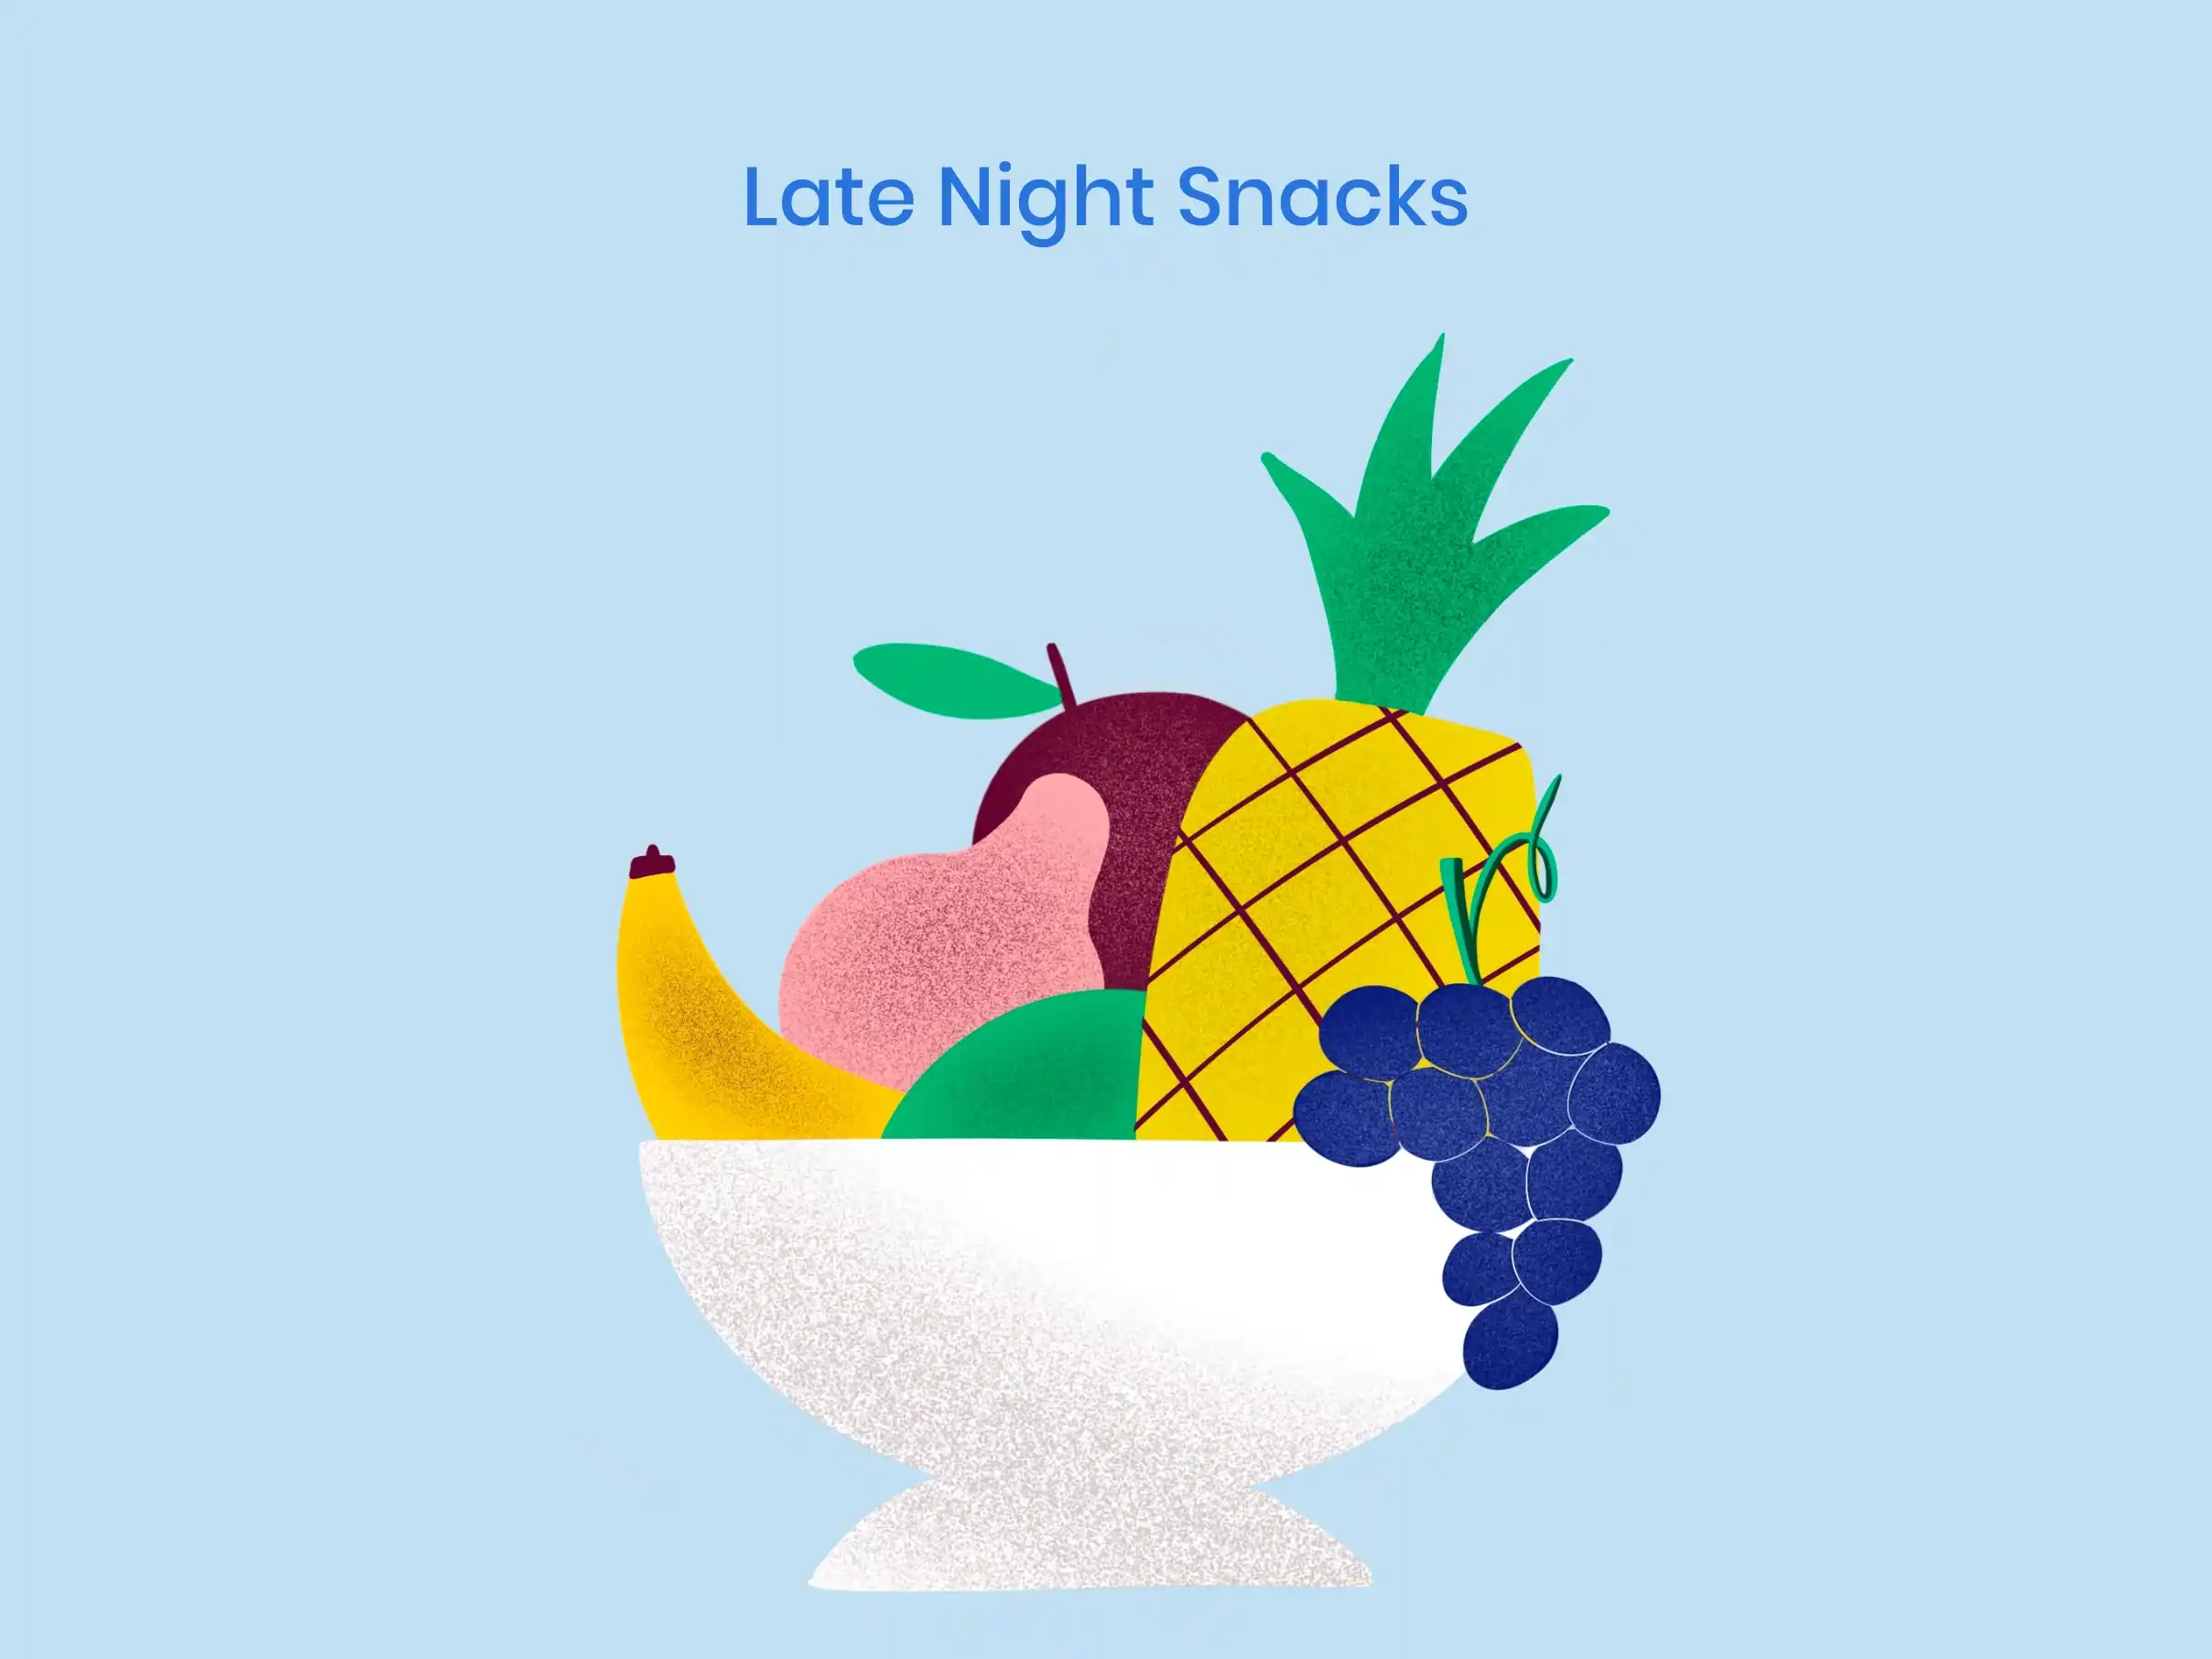 7 Easy Ways to Curb Your Nighttime Snack Cravings